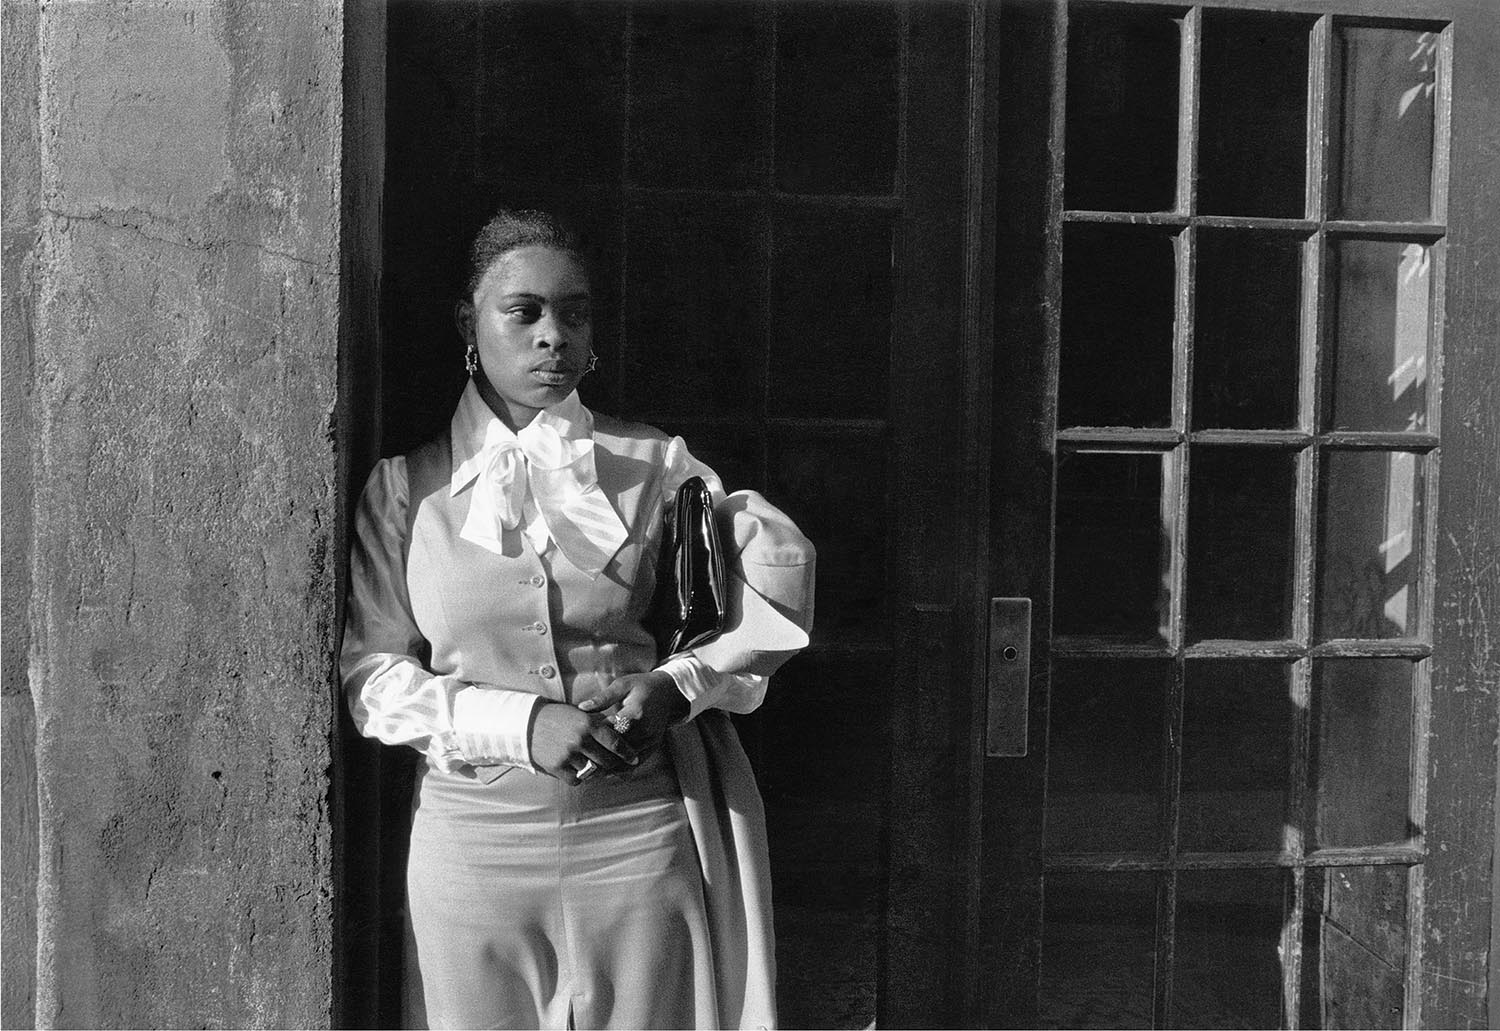 A black and white photograph of a woman waiting in a doorway